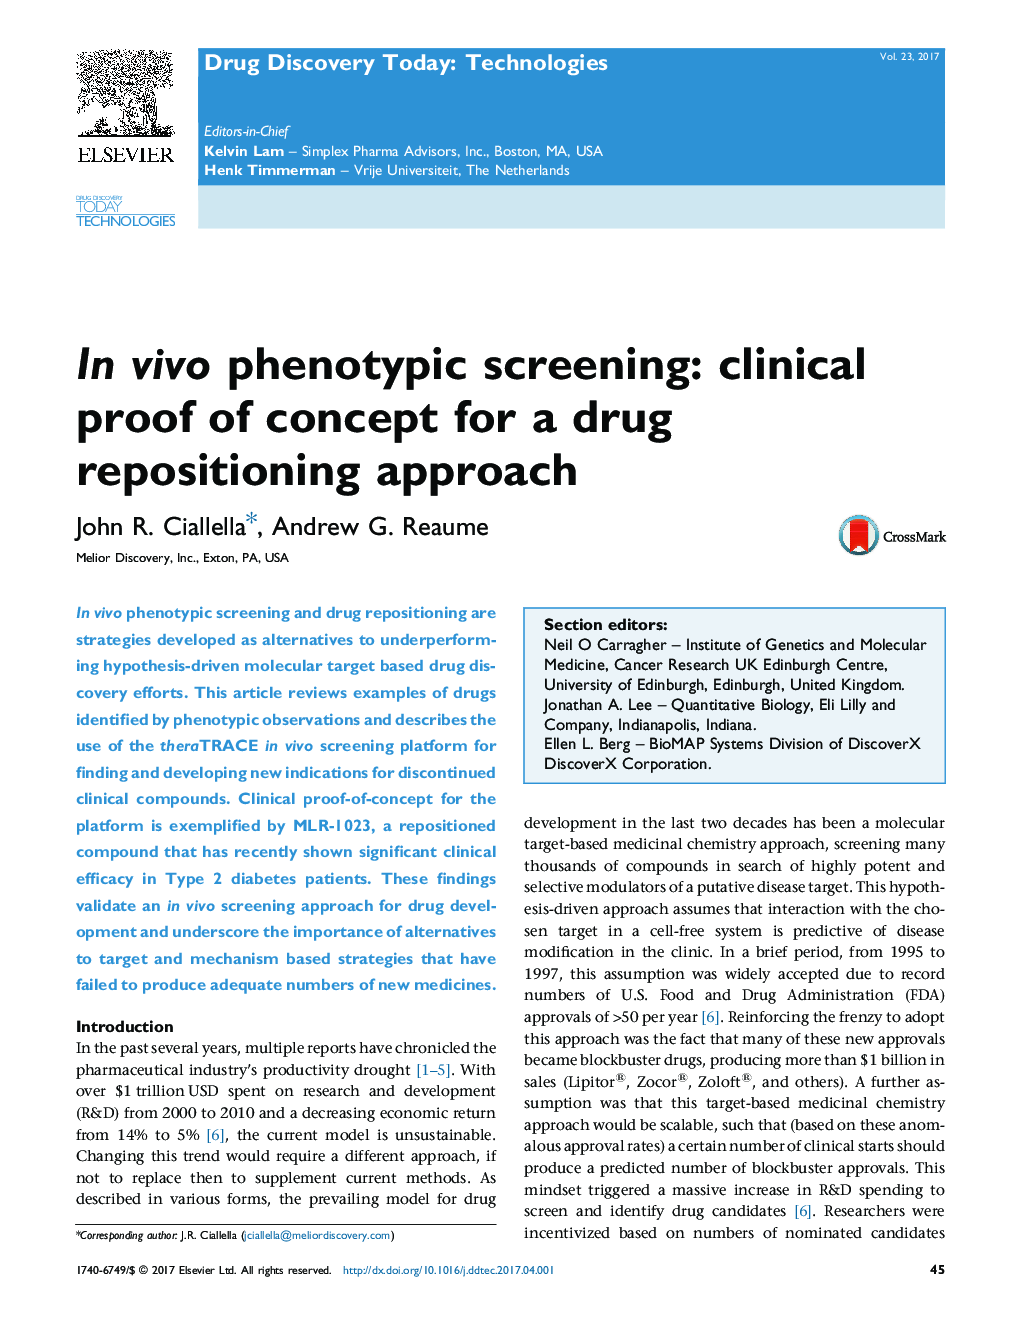 In vivo phenotypic screening: clinical proof of concept for a drug repositioning approach